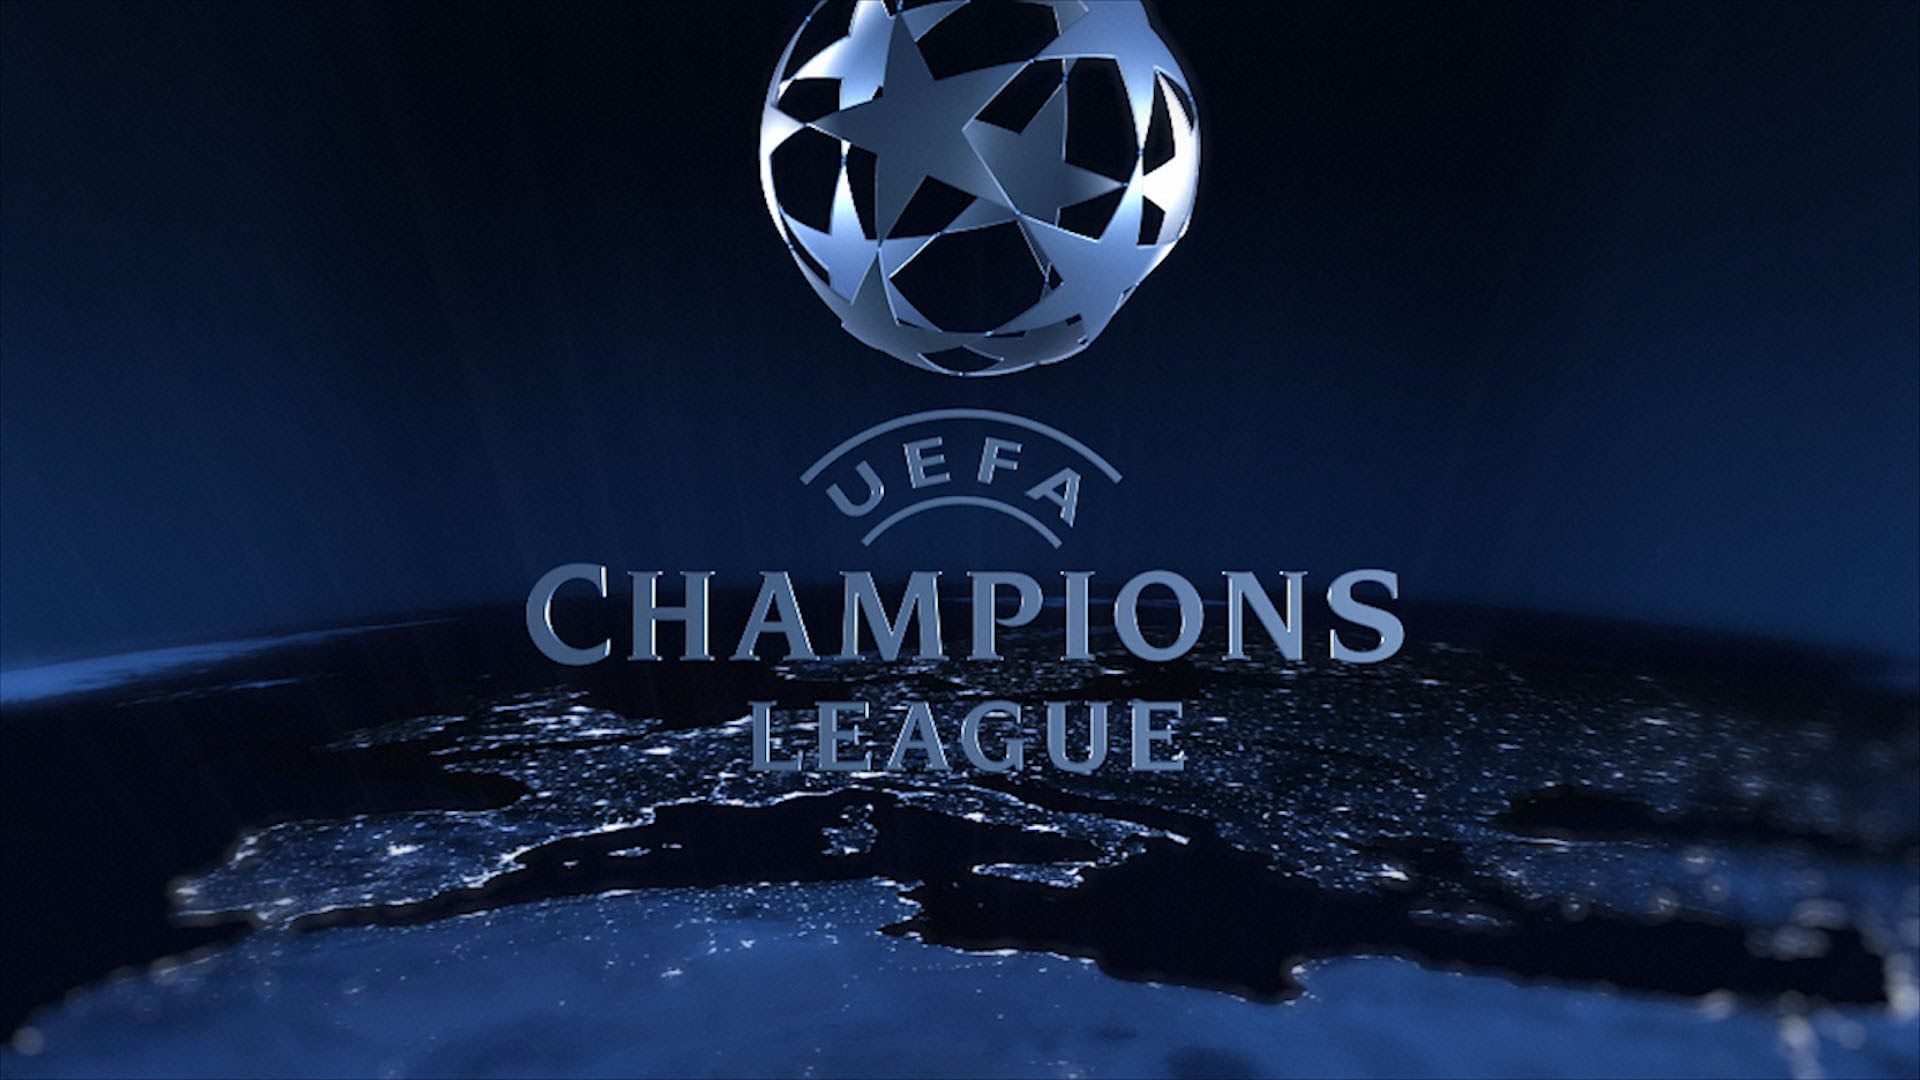 Champions League Wallpapers HD Full HD Pictures